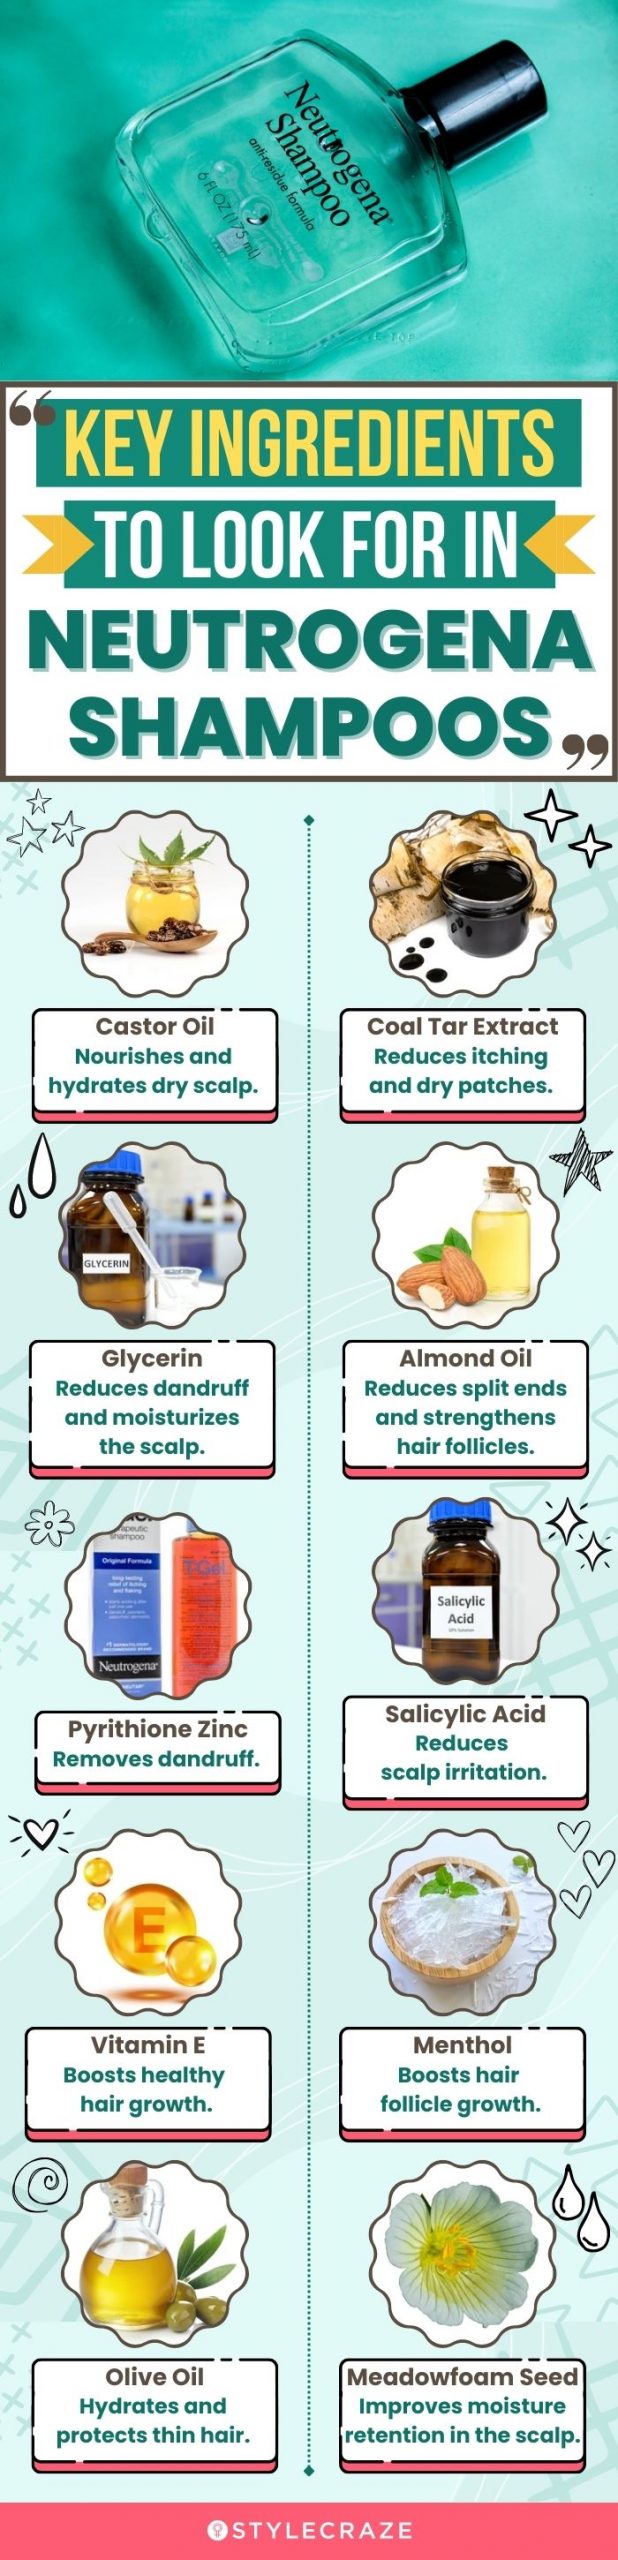 Key Ingredients To Look For In Neutrogena Shampoos (infographic)